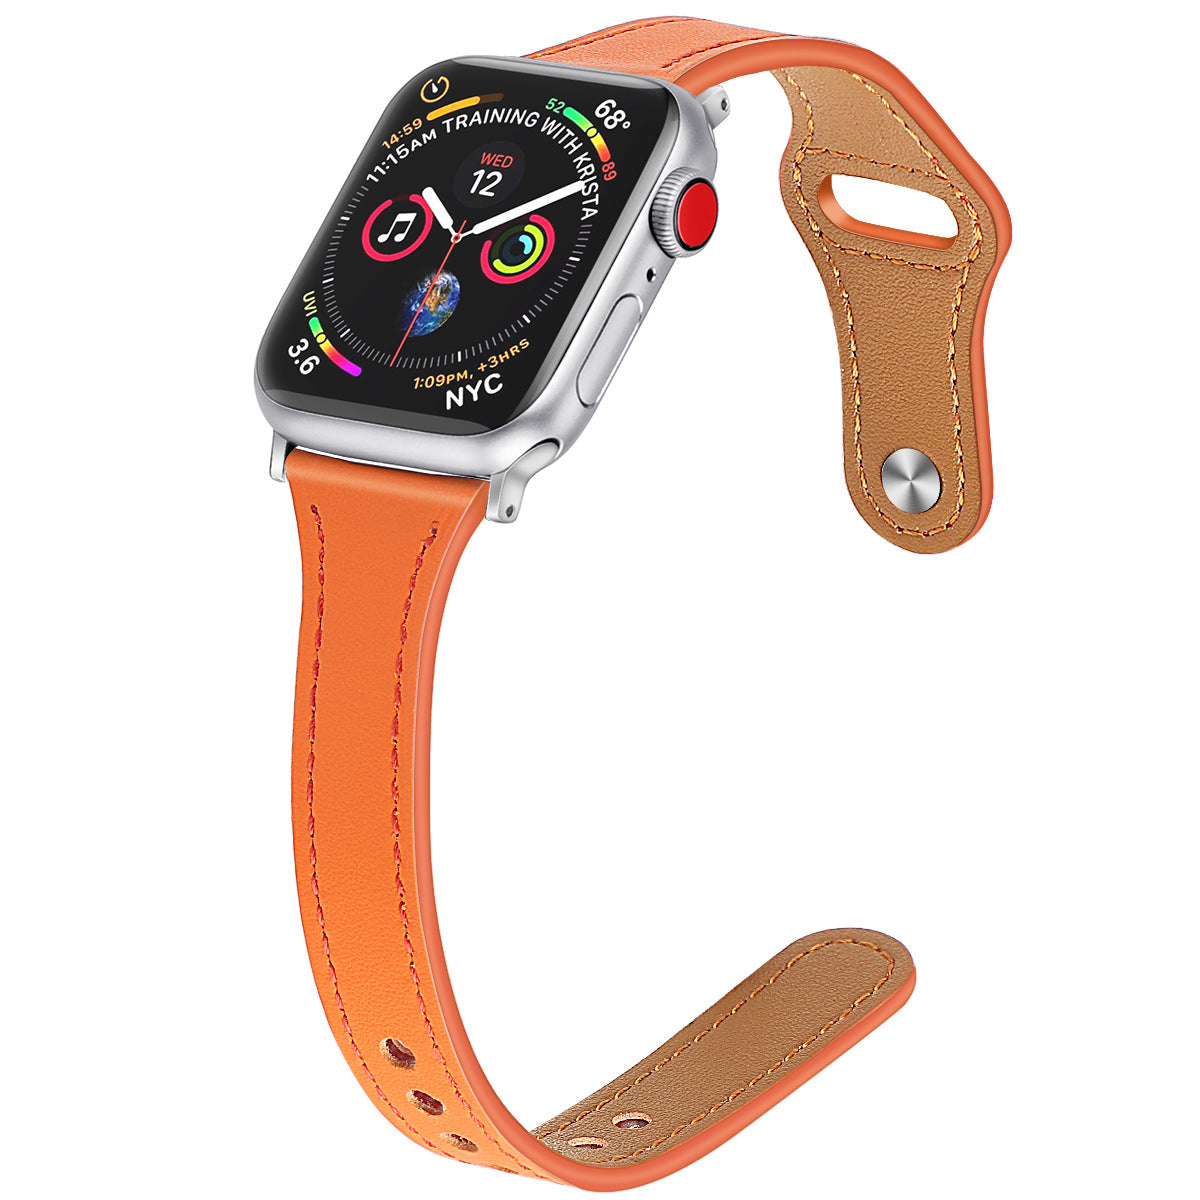 Suitable for Apple watches with small waist and leather strap, ultra-fine and minimalist fit